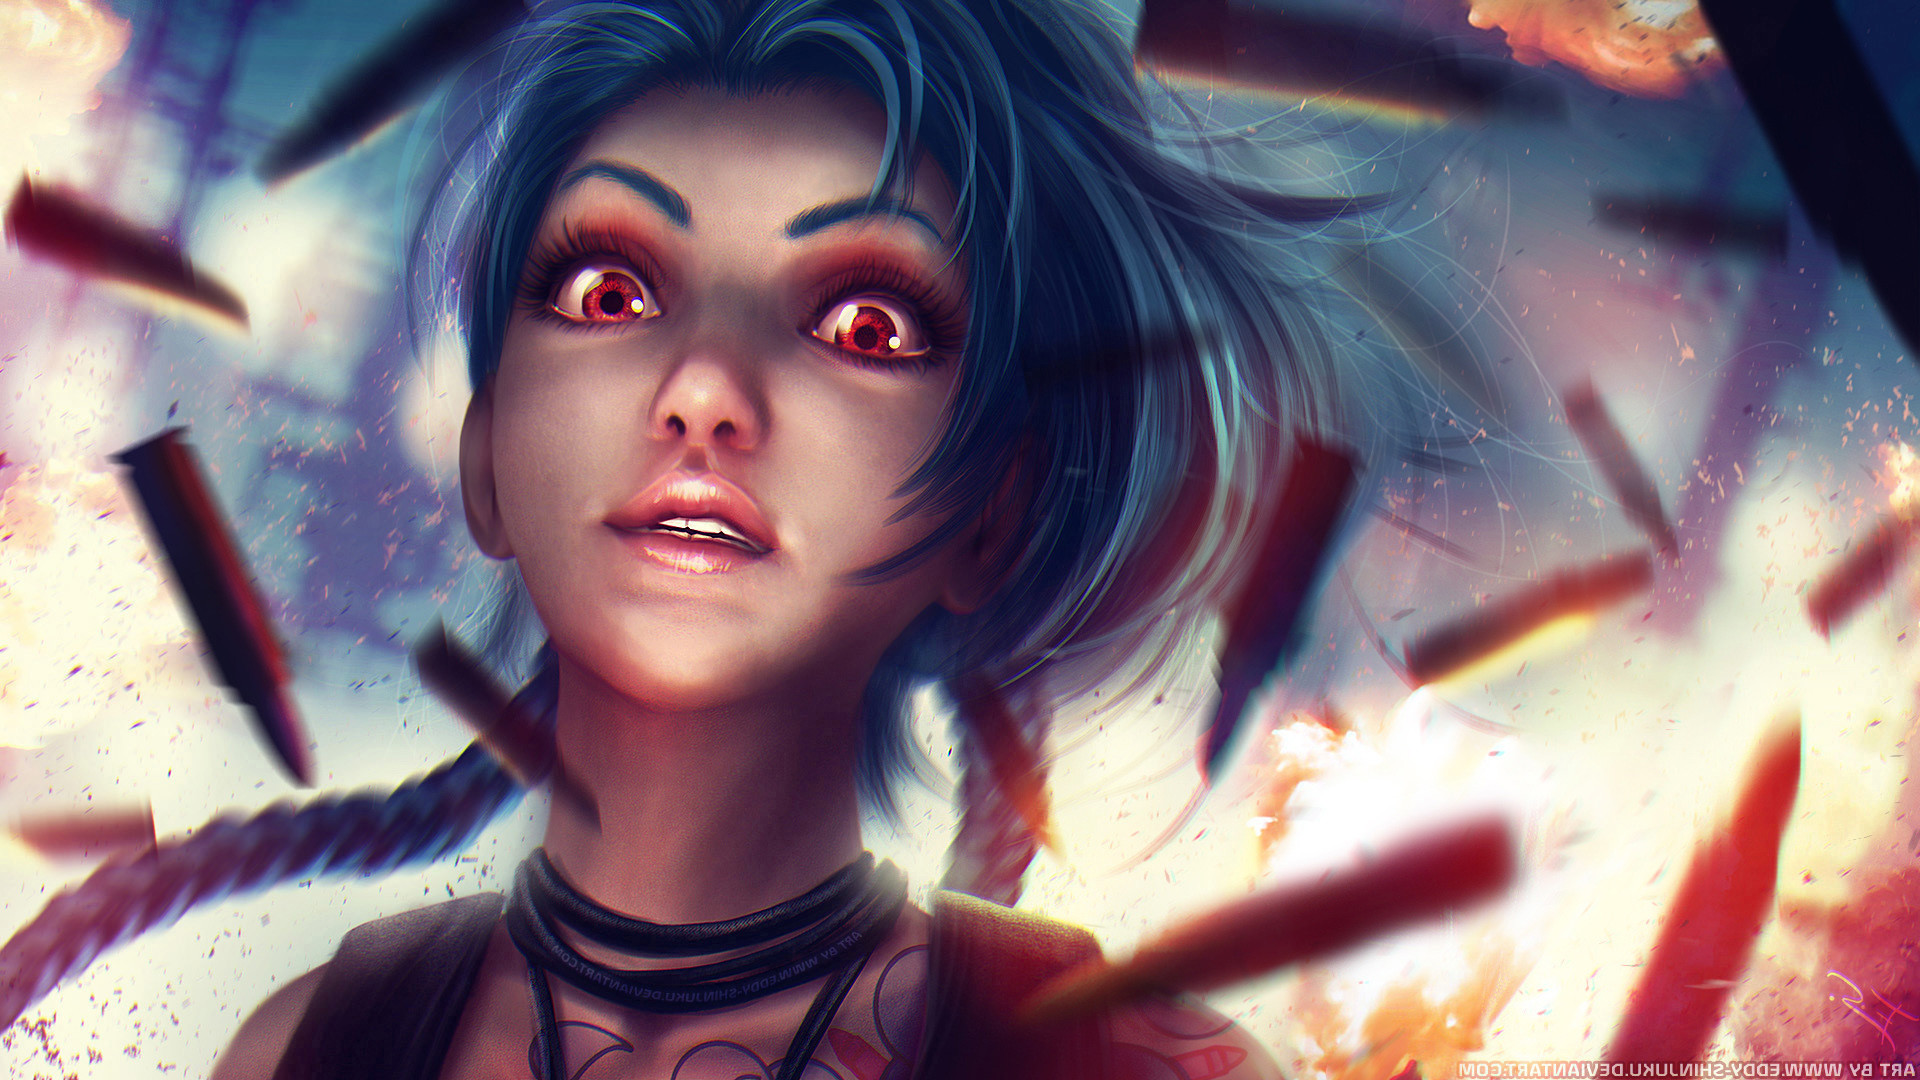 League of legends jinx wallpaper high definition with high resolution wallpaper on games category similar with